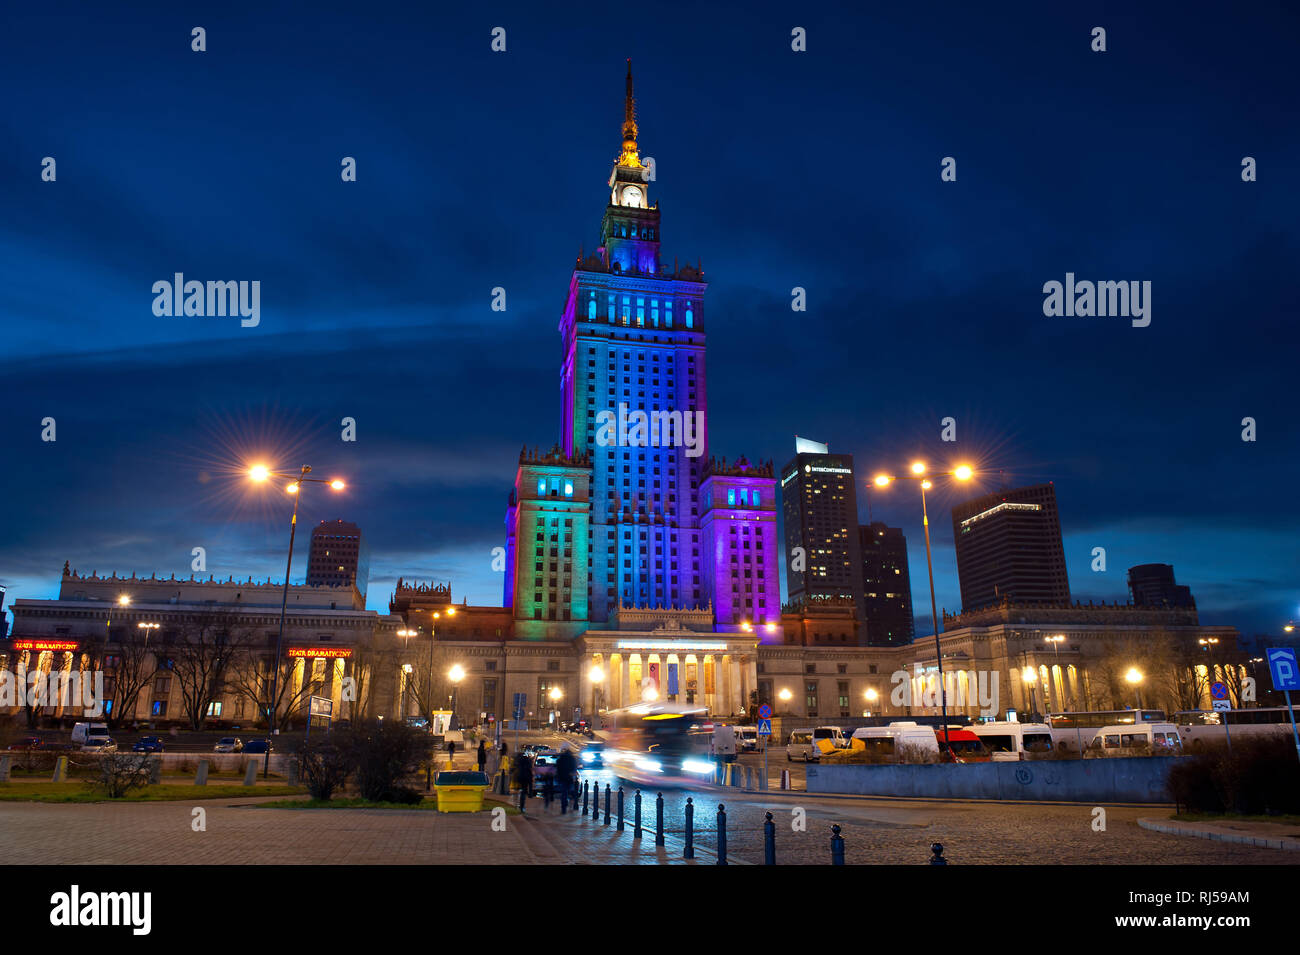 Palace of Culture and Science in rainbow colors, Palac Kultury i Nauki, PKiN, in central Warsaw, Poland, Dec, 2013, Stock Photo